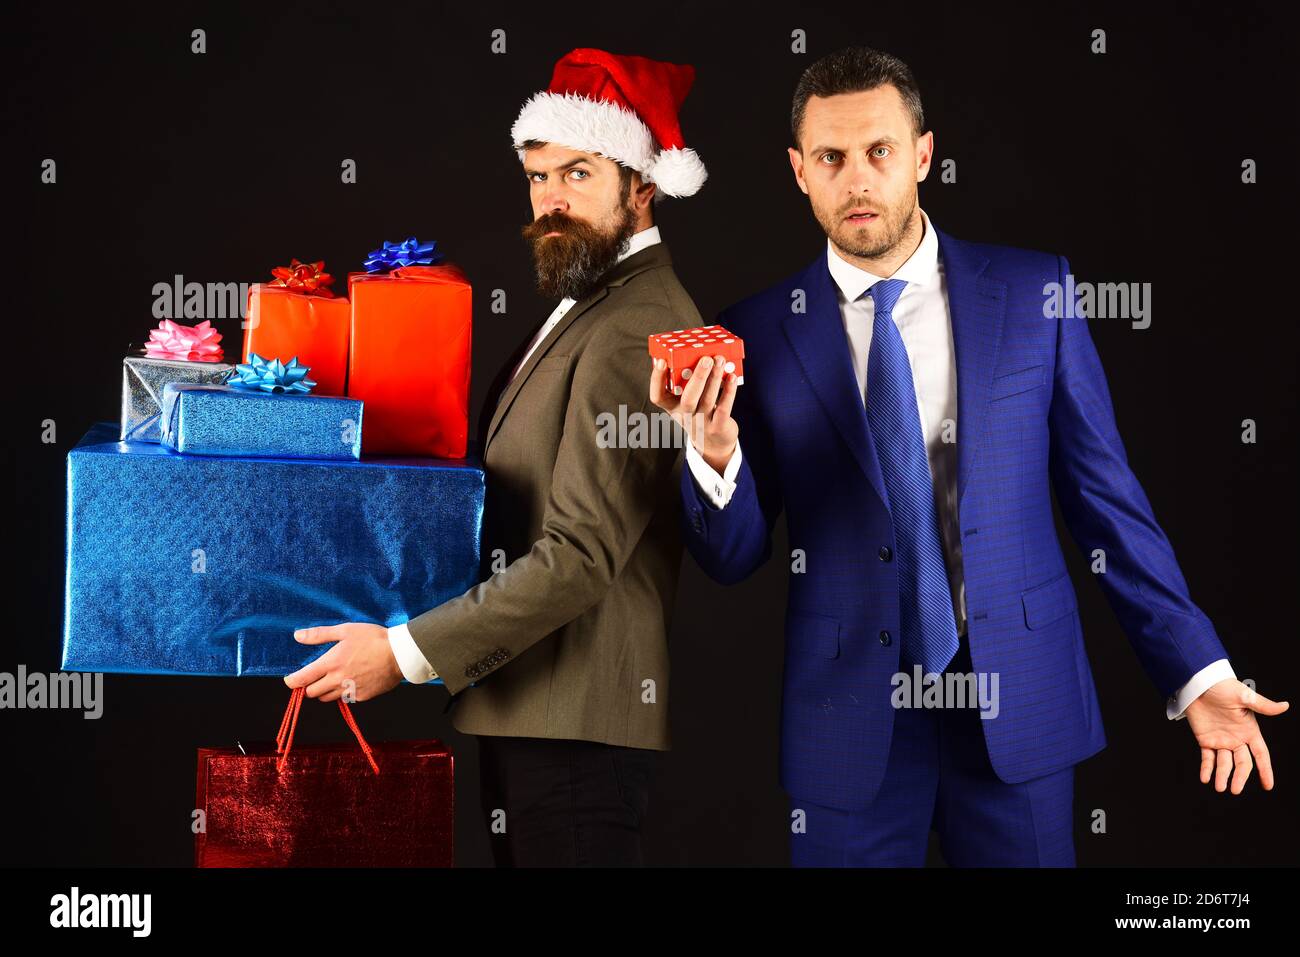 Christmas online shopping concept. Man in smart suit holding little box. Serious businessman holding big boxes and shopping bags isolated on black background Stock Photo